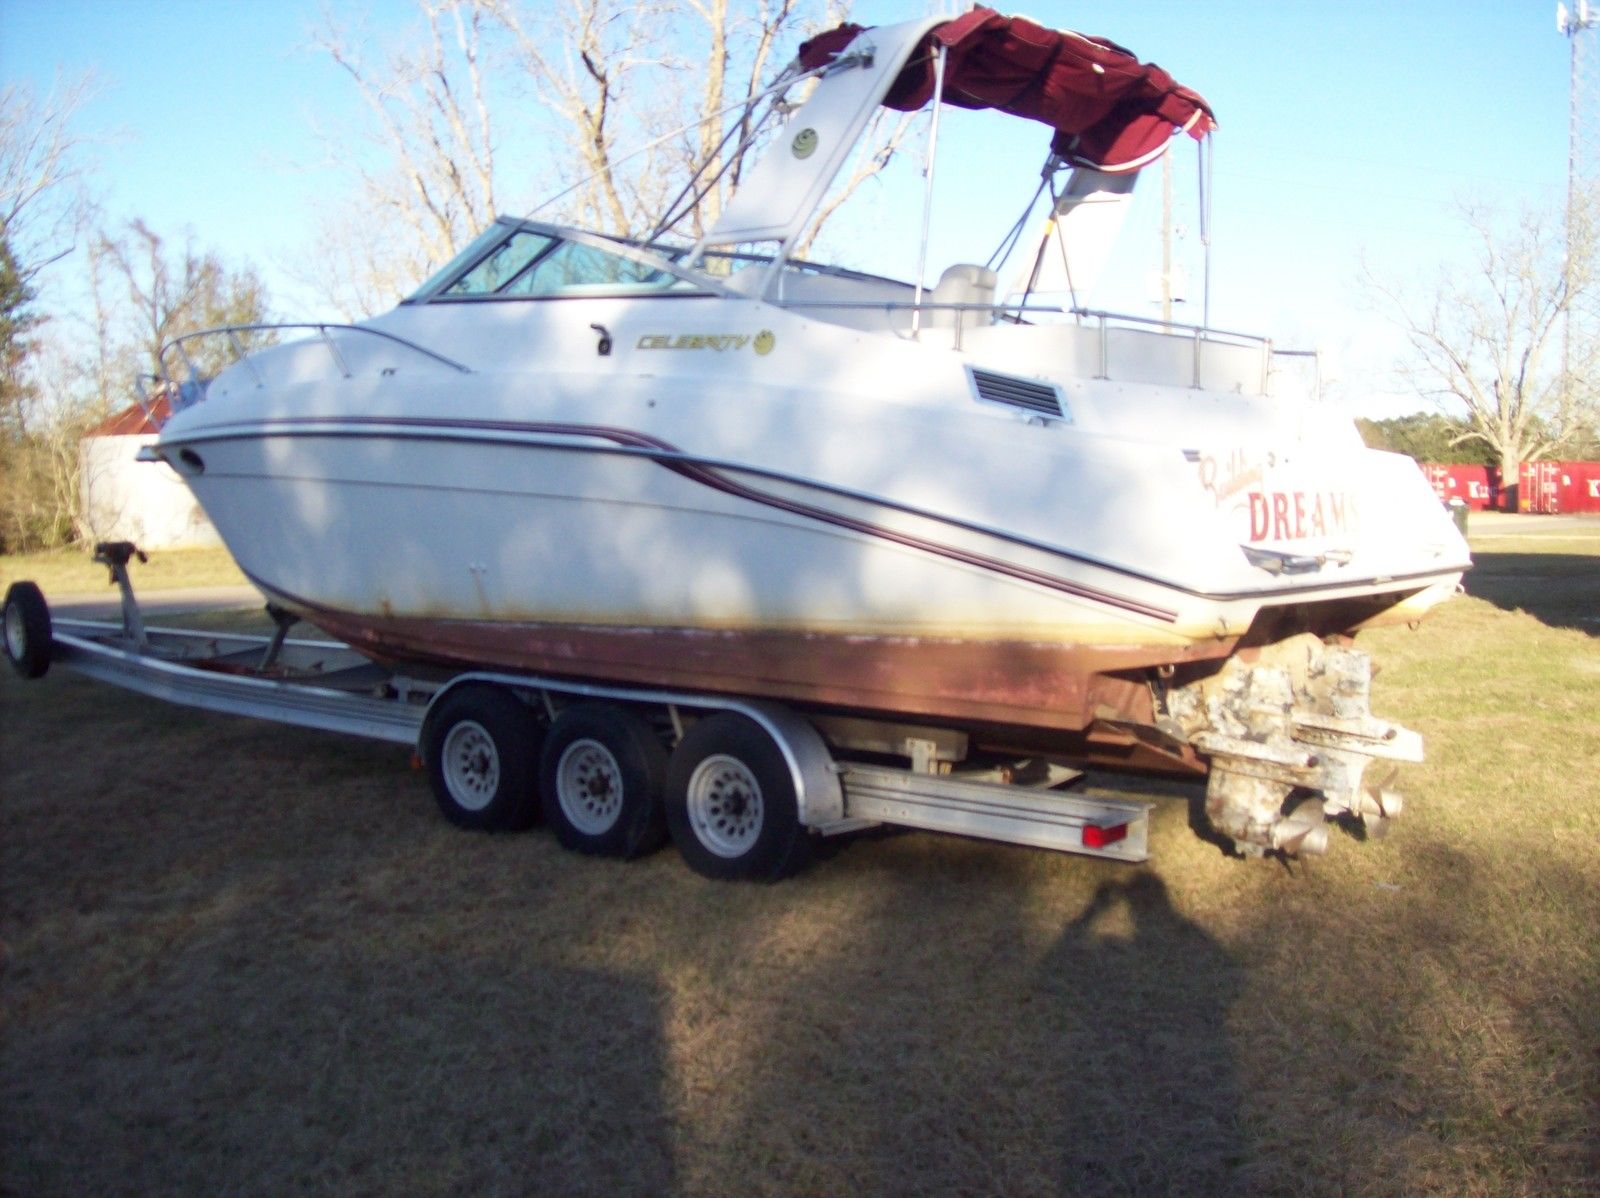 Celebrity 310 Cruiser Twin V8 Boat With Water Damage Possible Bad Motors